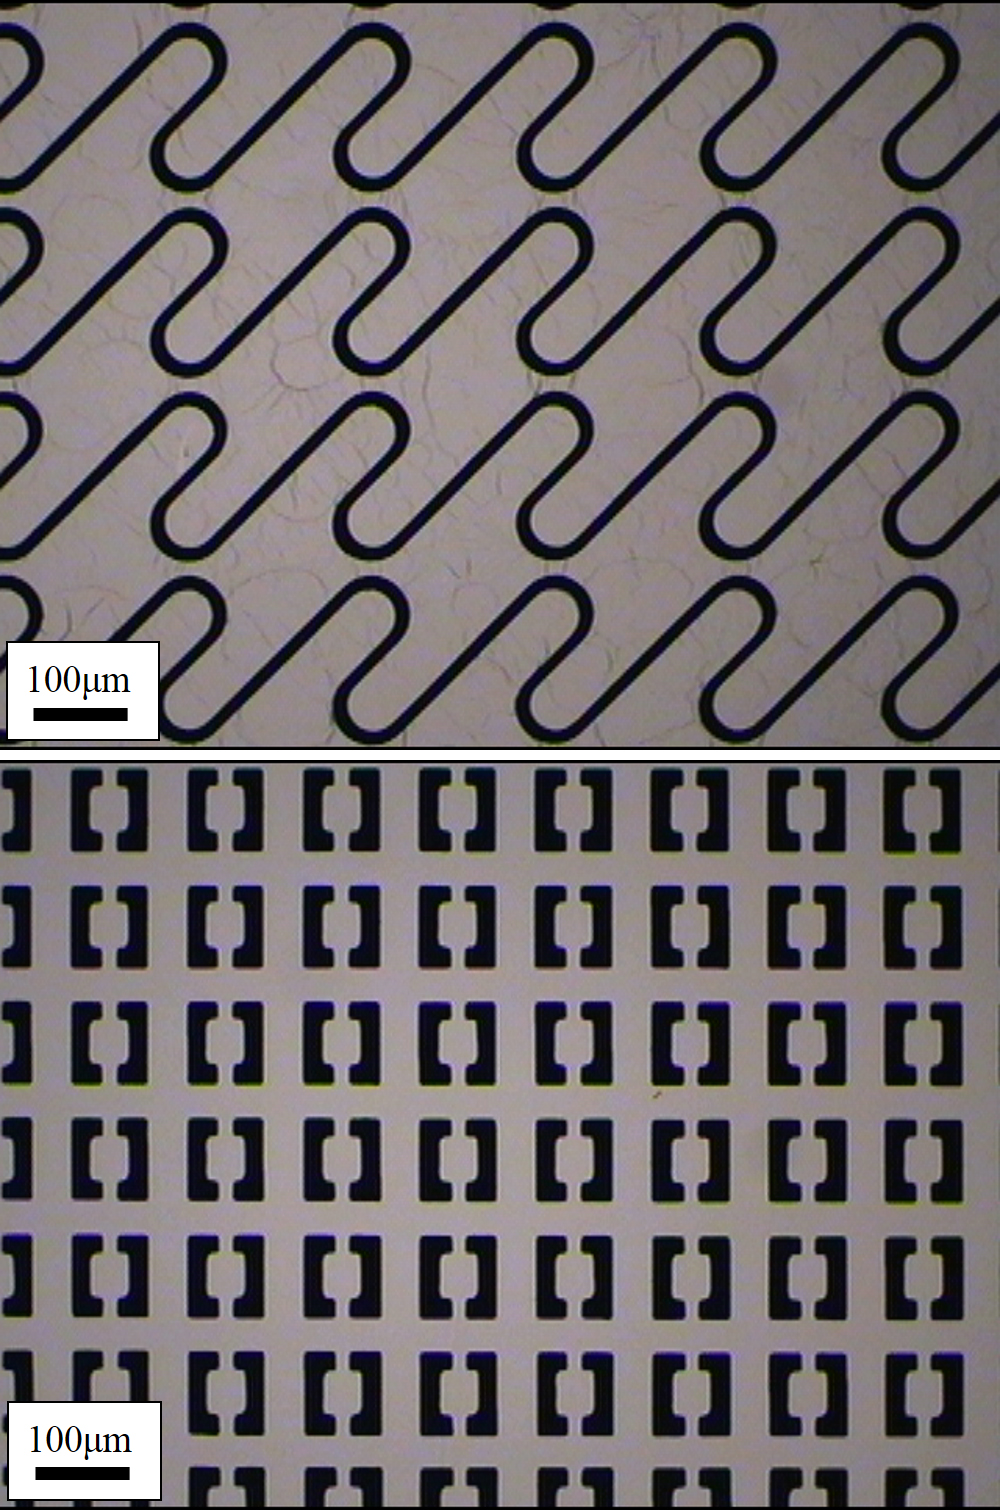 Metamaterials fabricated by using Galvano scanner system.